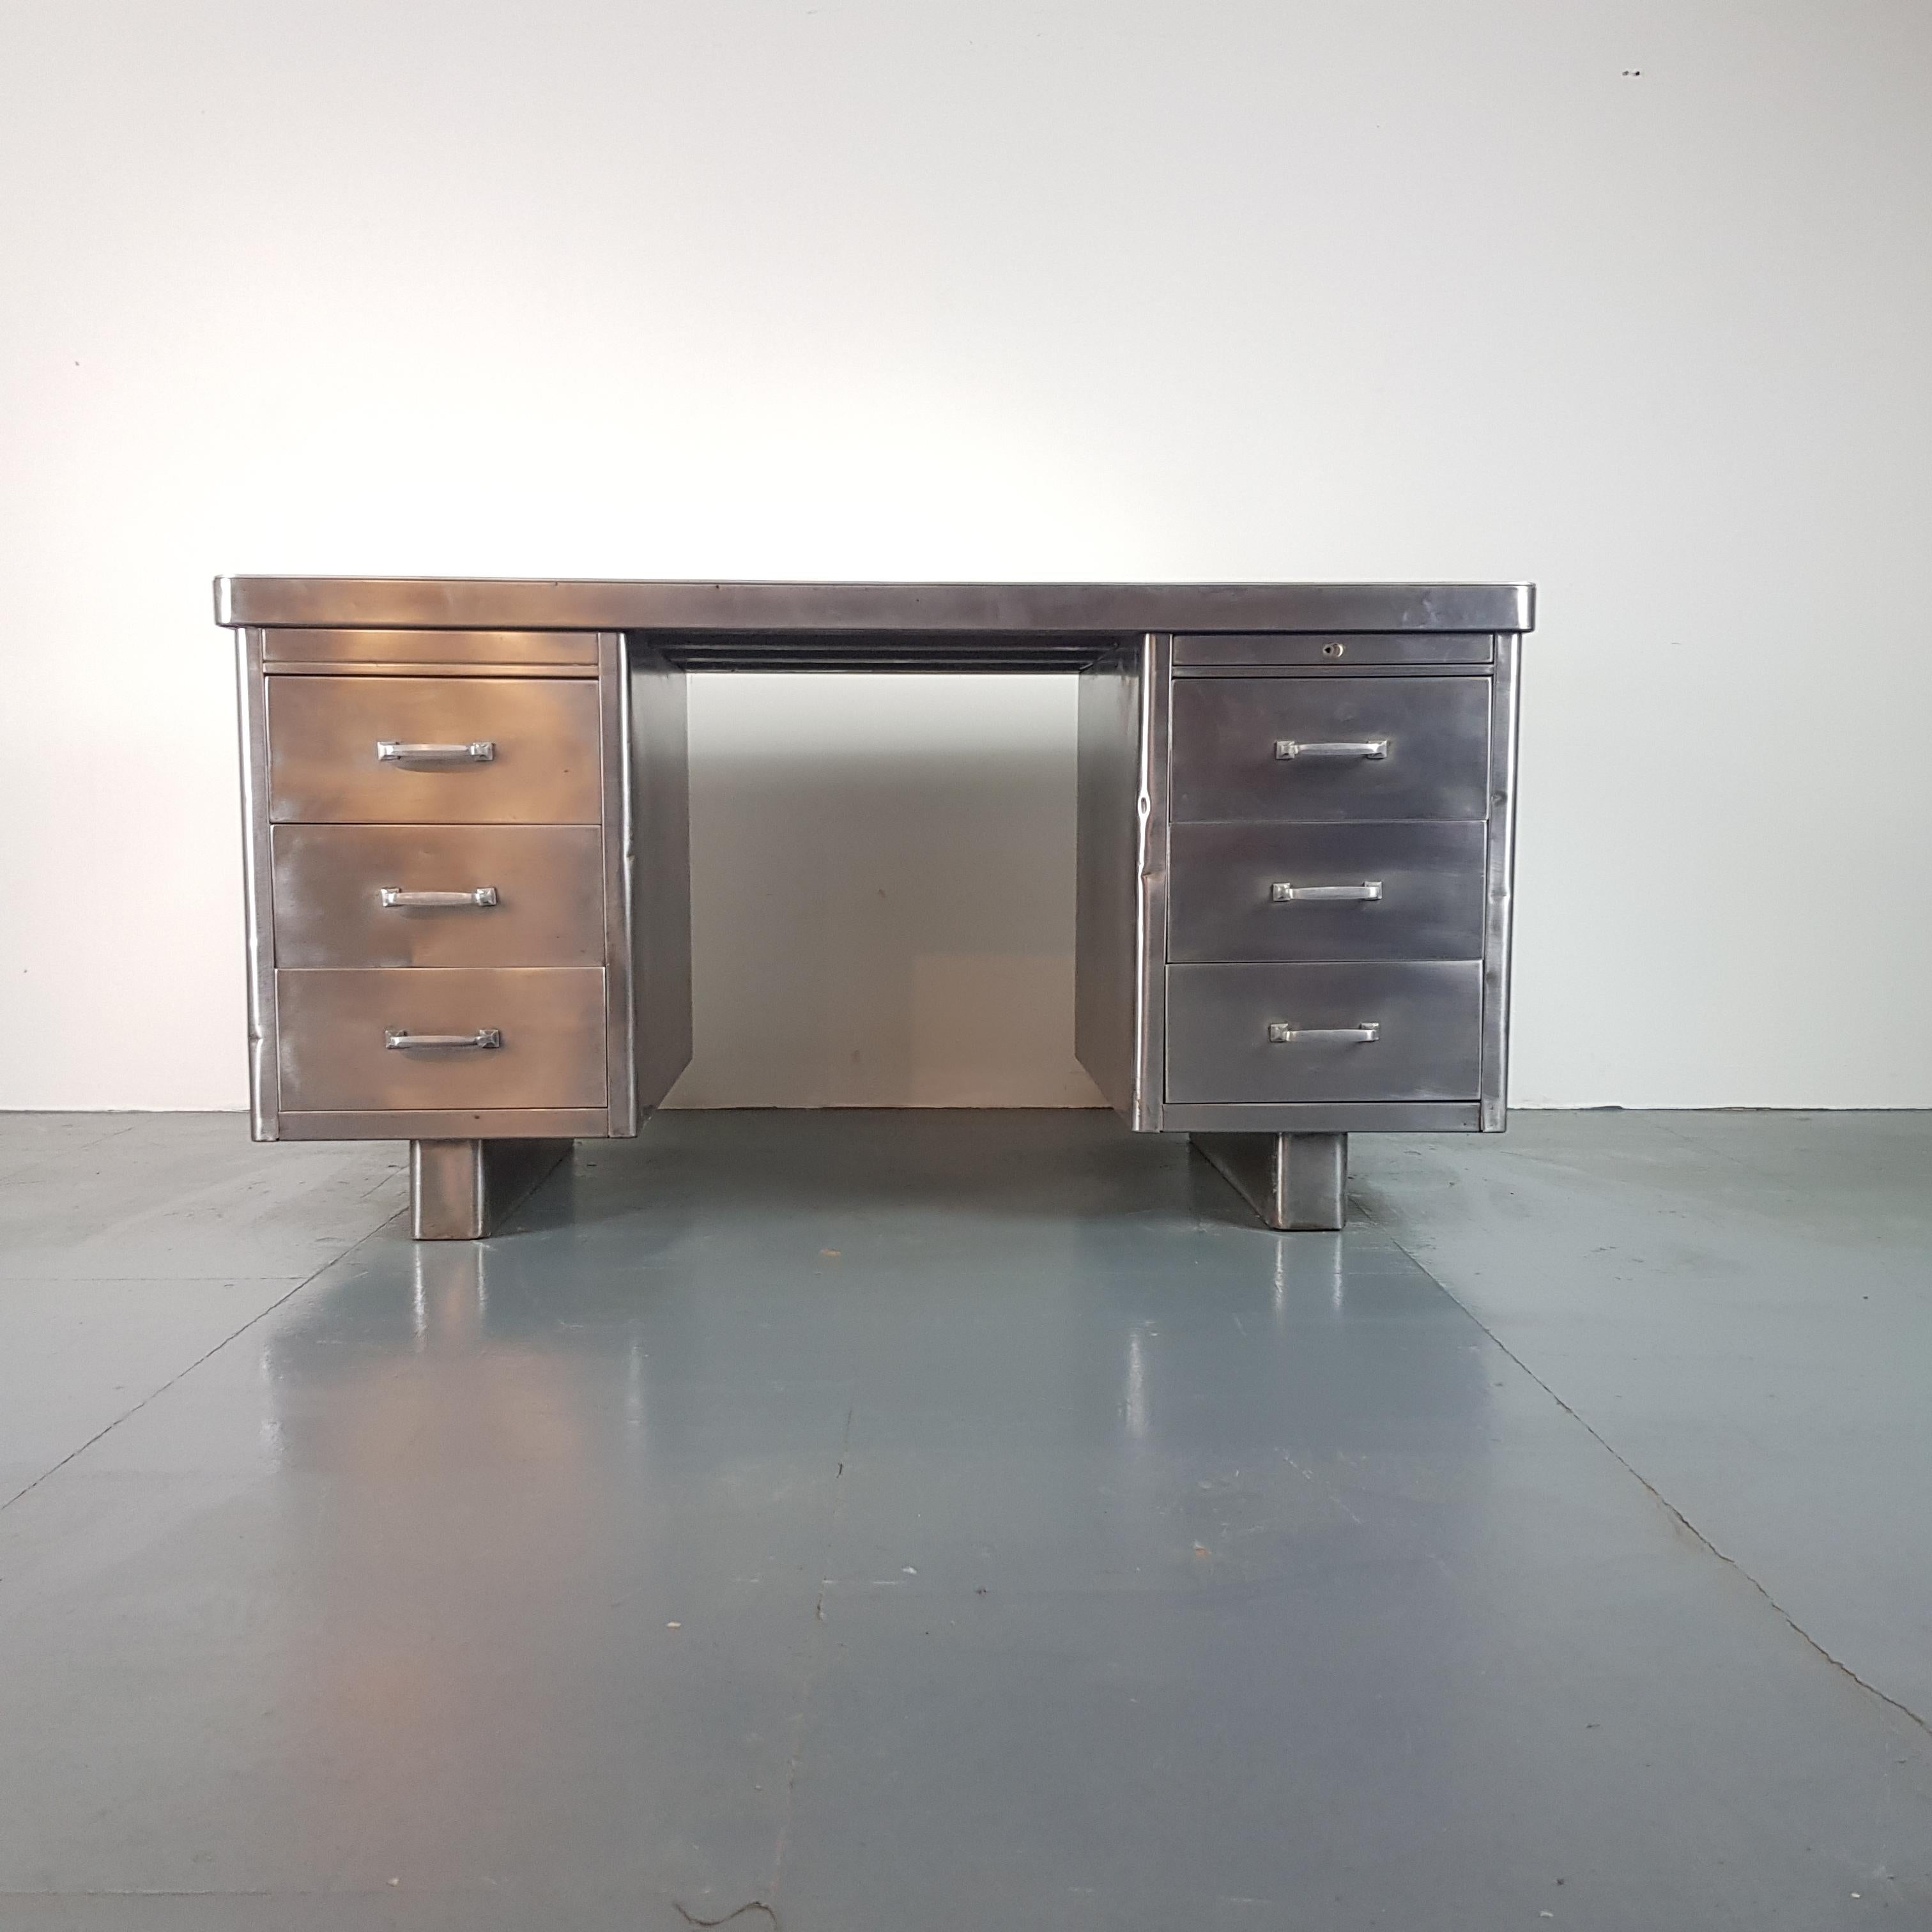 Lovely vintage double pedestal polished steel desk.

In good vintage condition - this piece comes from a working industrial environment and as such, has signs of wear and tear commensurate with age i.e bumps, scuffs etc, all adding to the